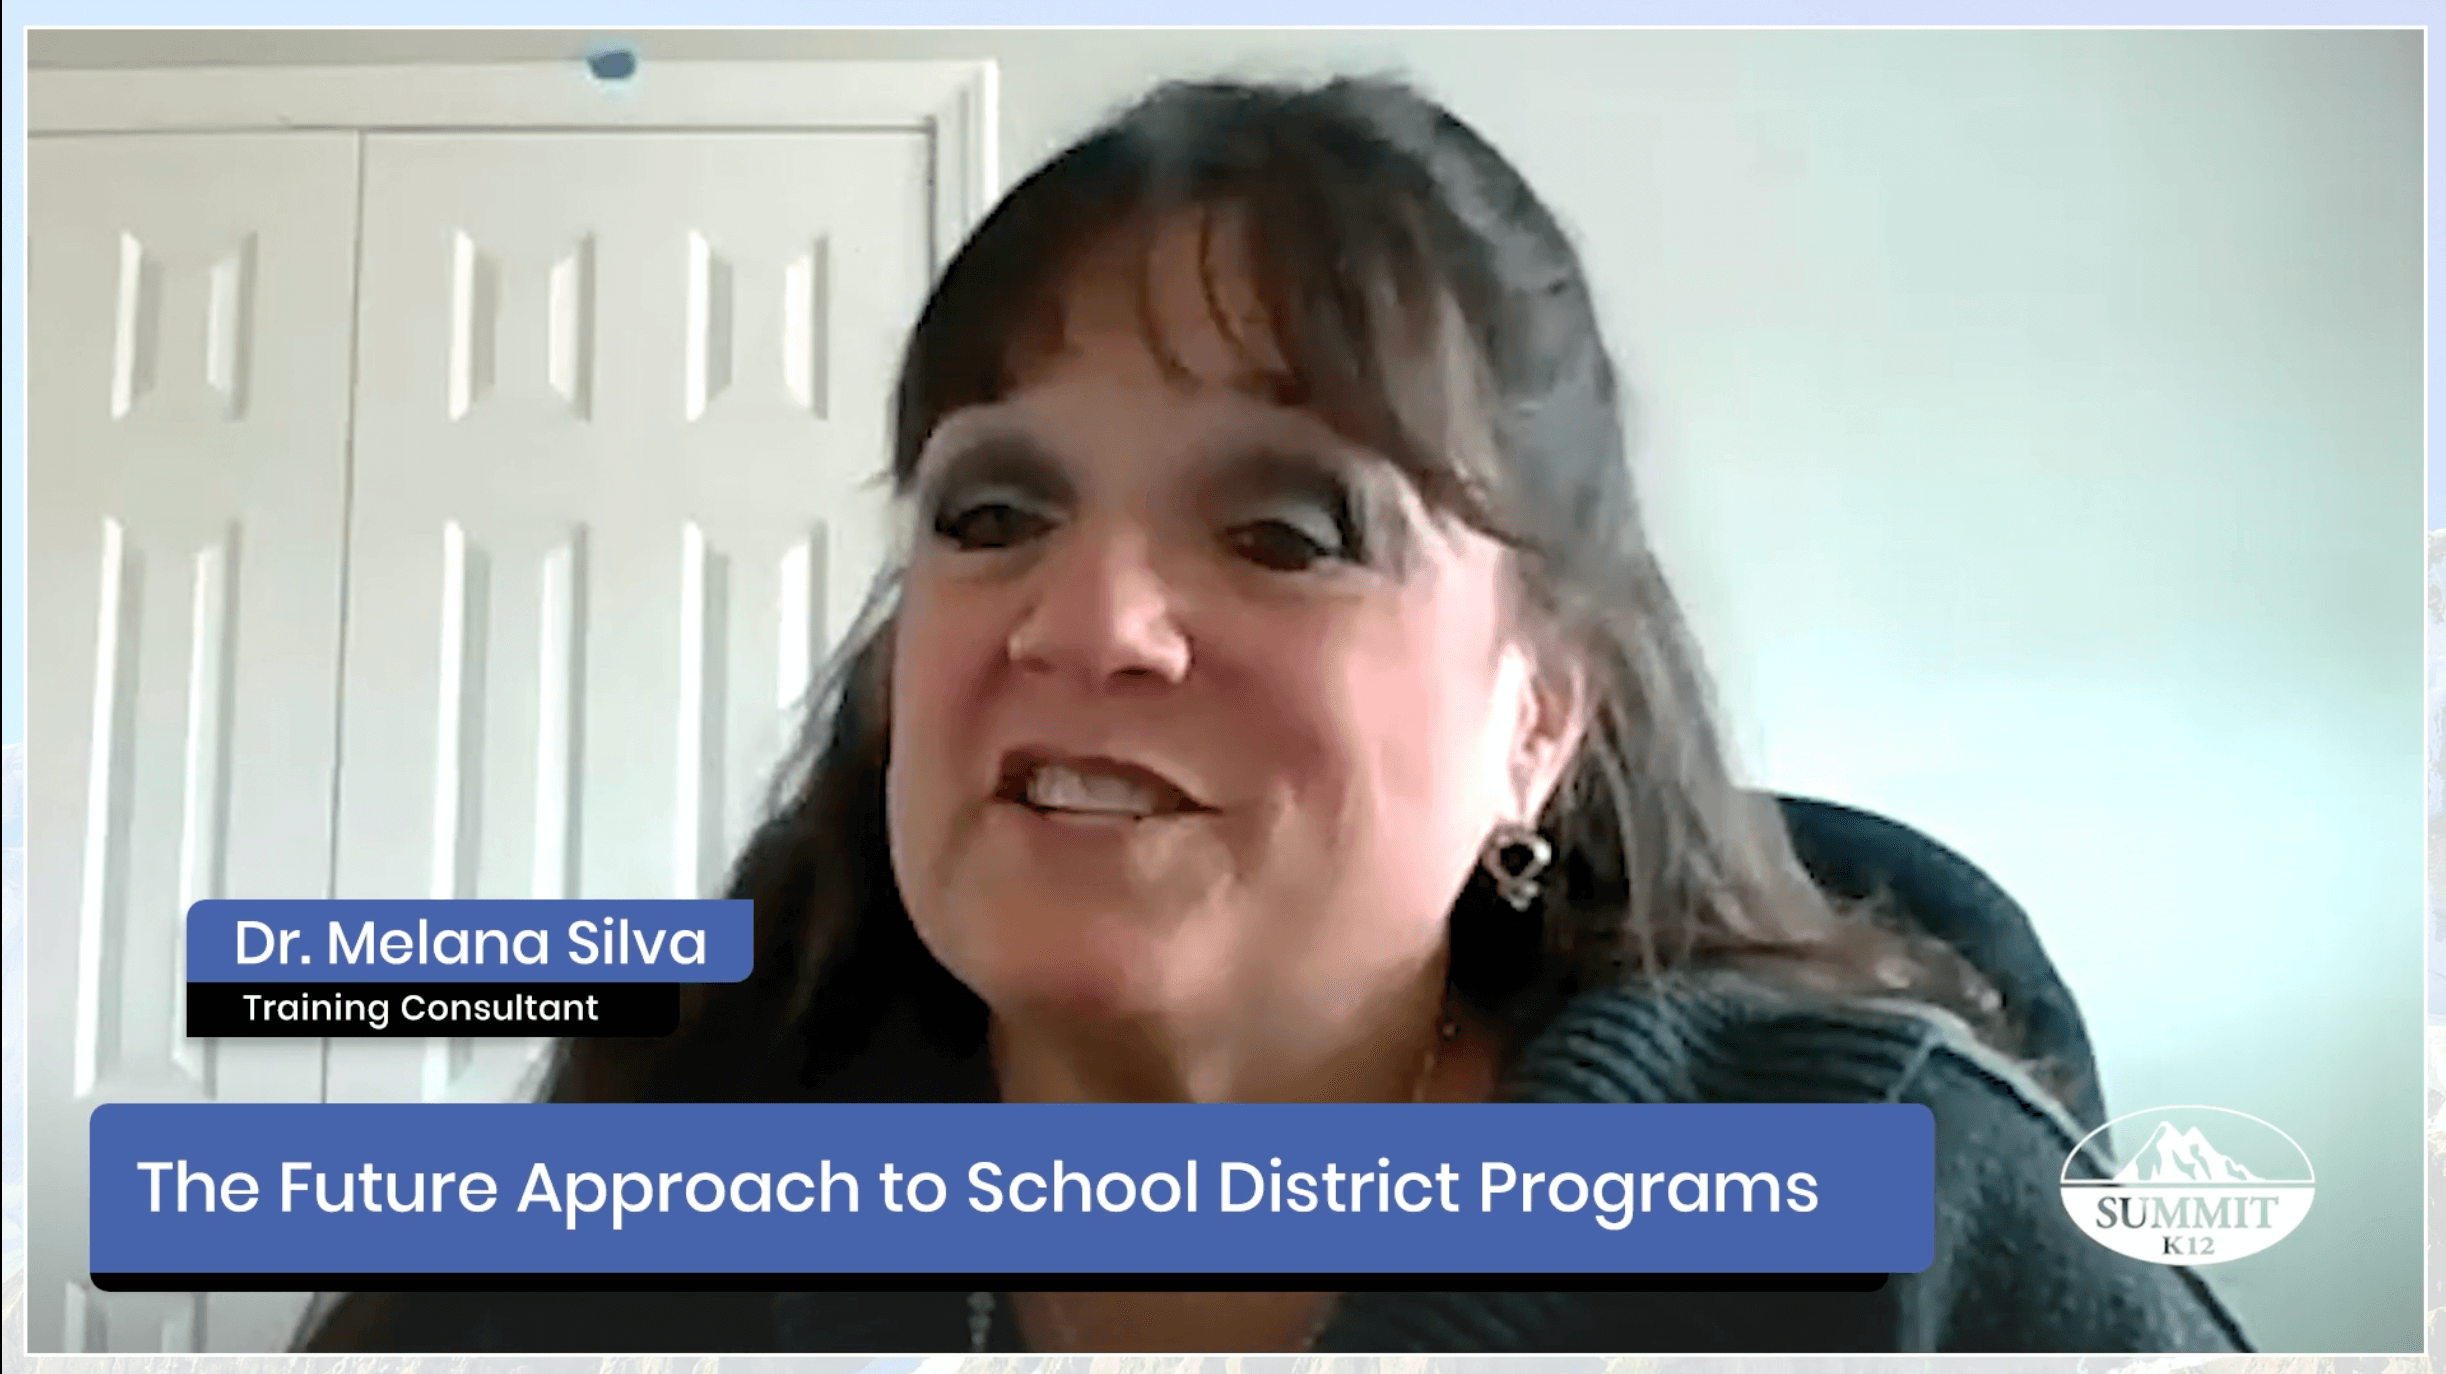 The Future Approach to School District Programs